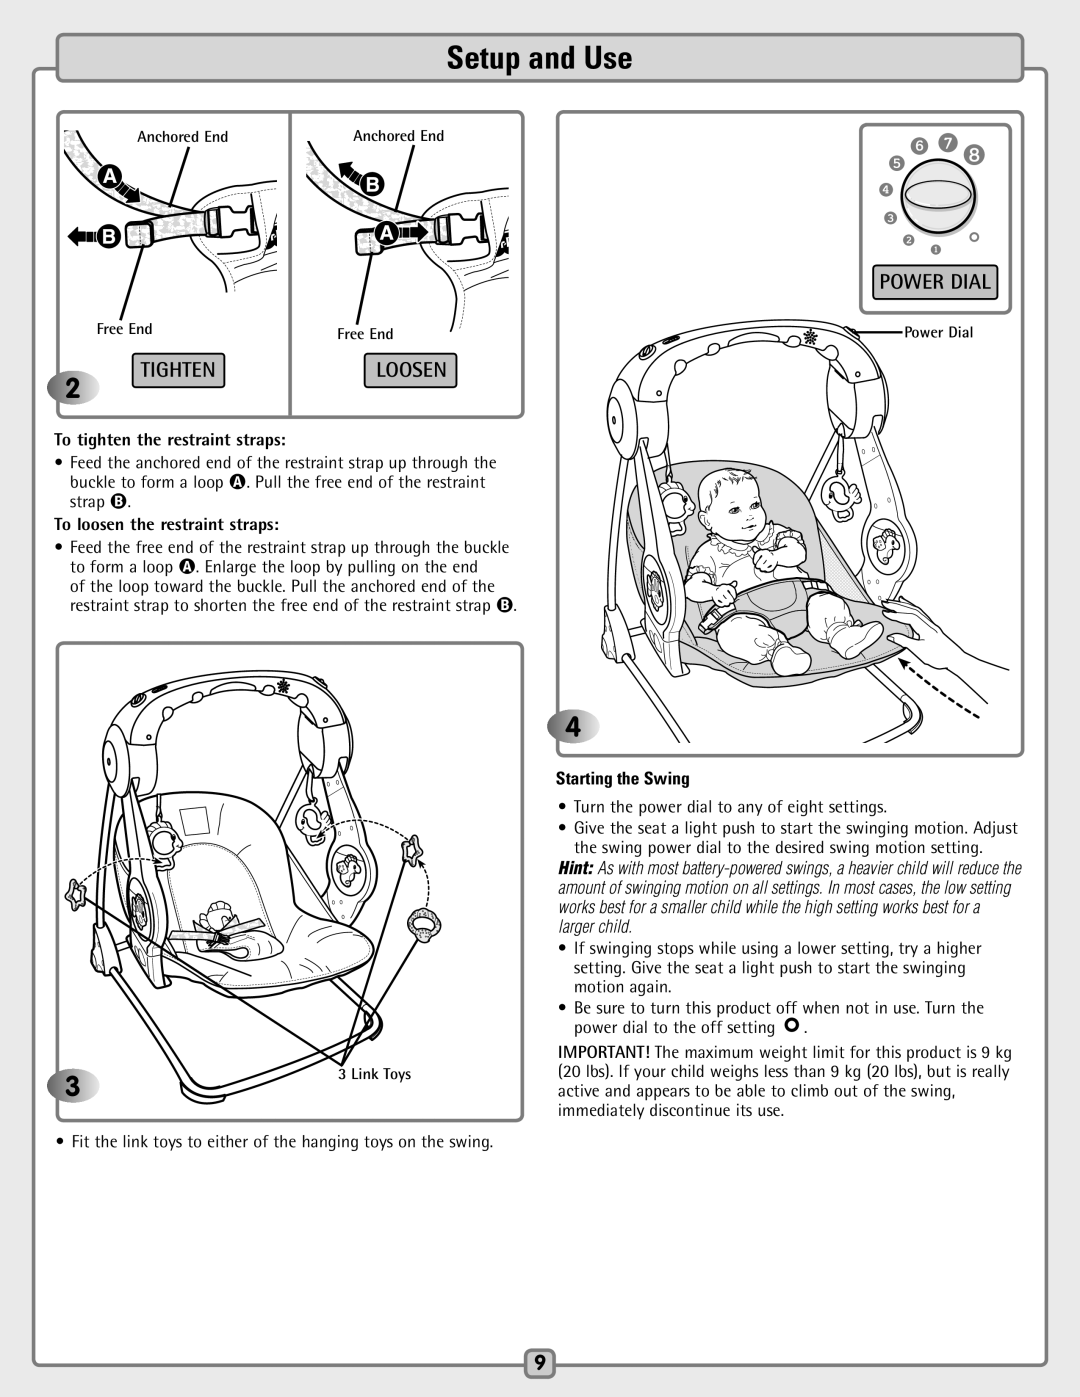 Fisher-Price H7181 manual Setup and Use, Tighten, Loosen, Power Dial, To tighten the restraint straps, Starting the Swing 